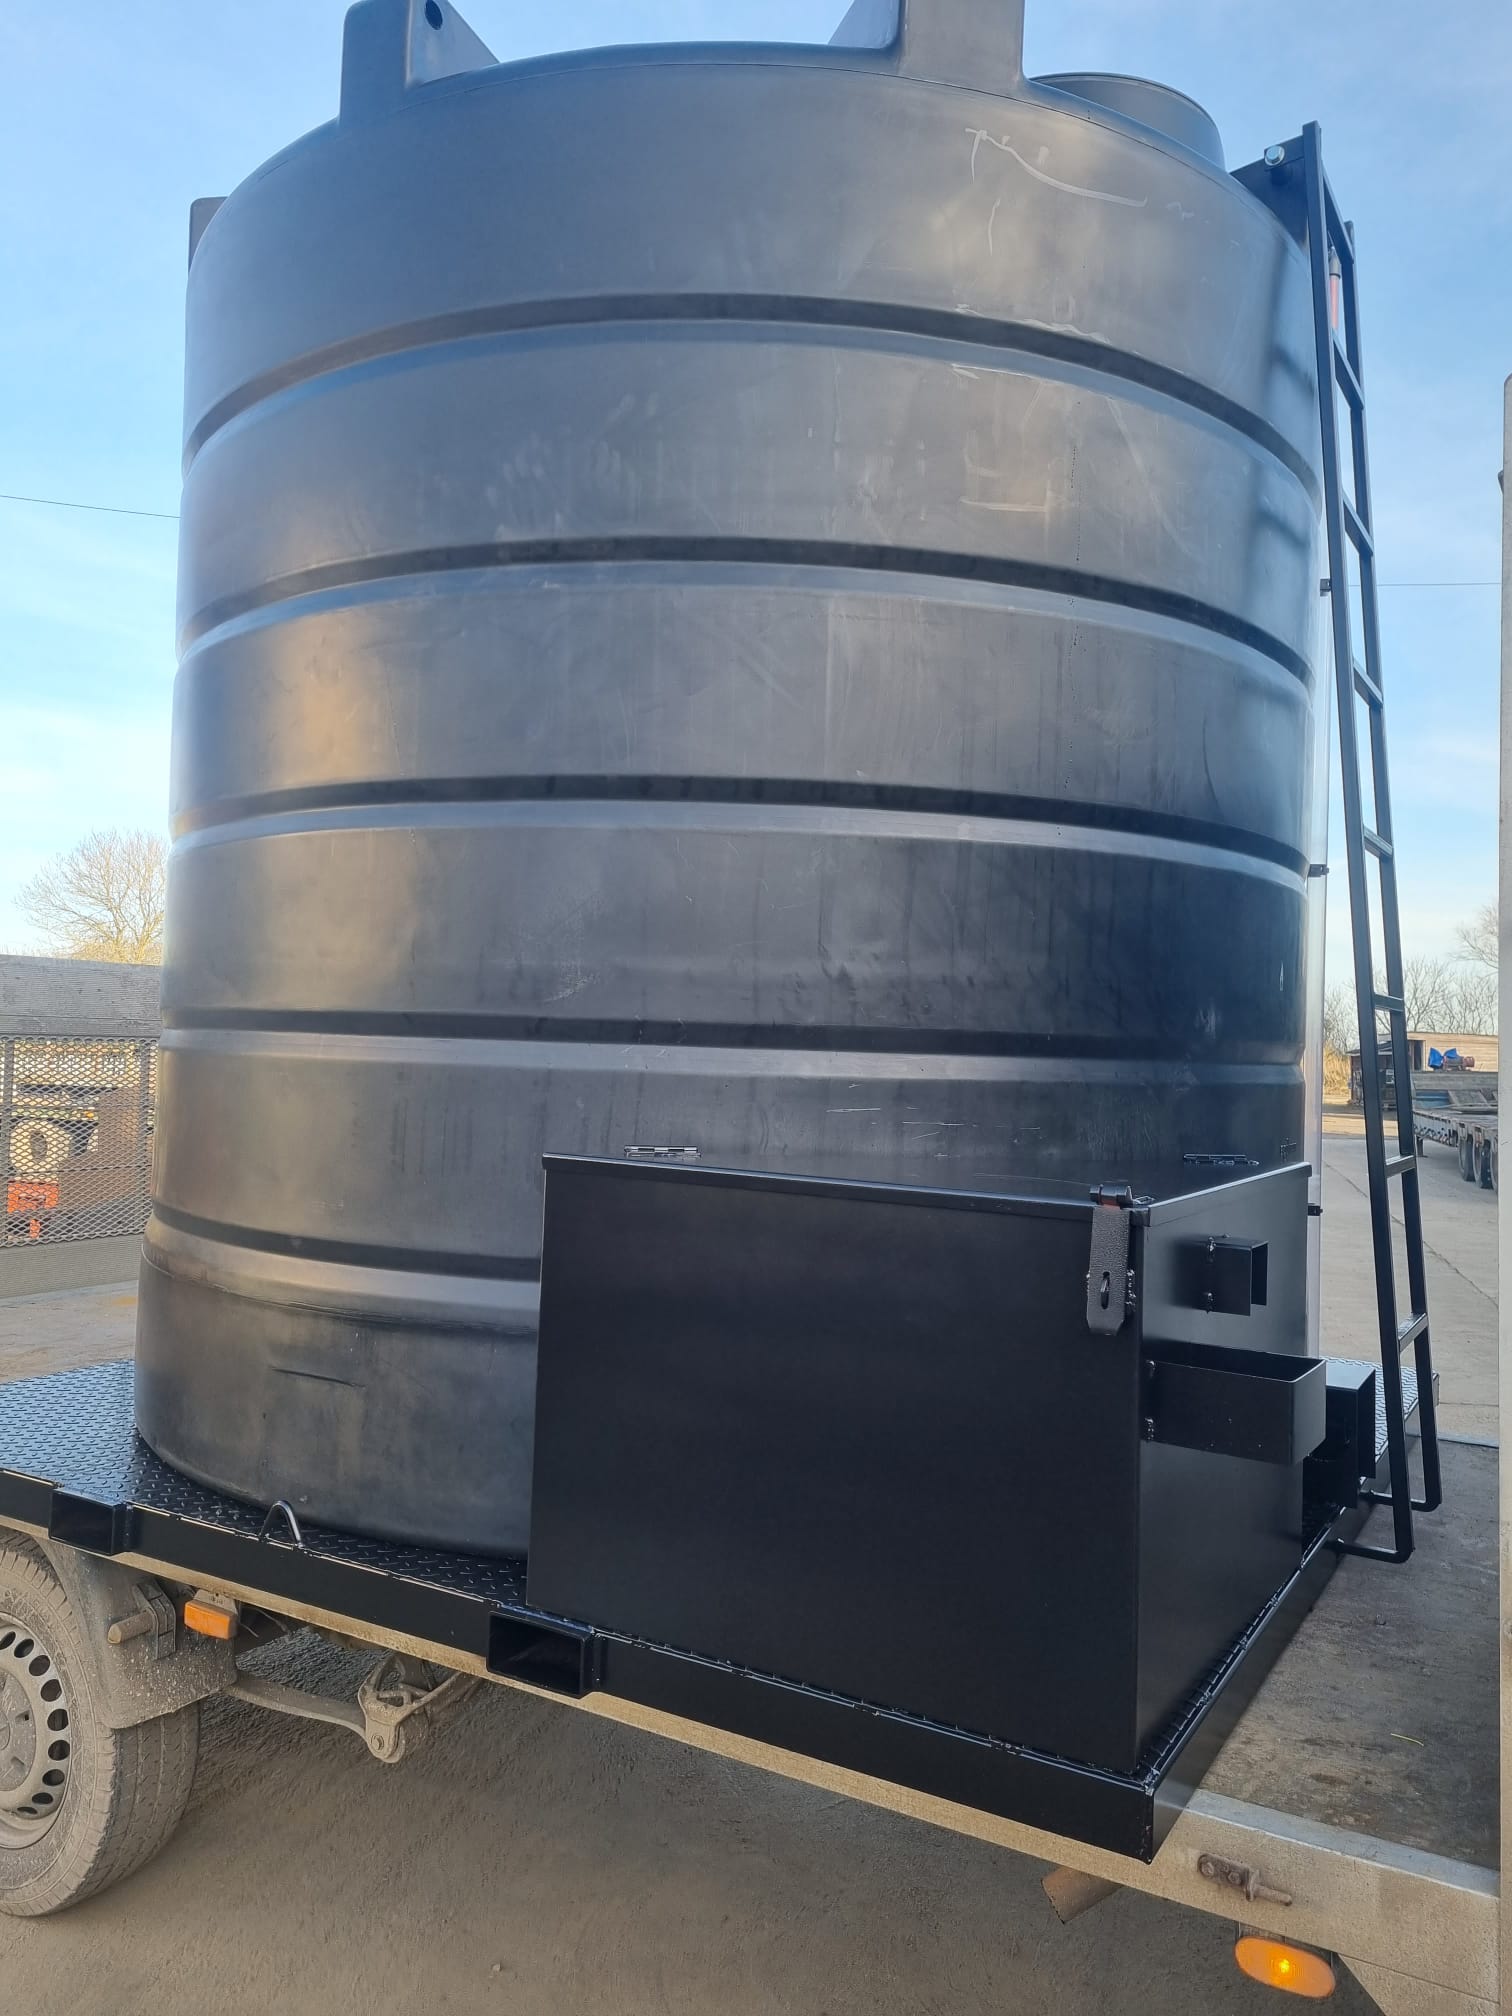 10,000ltr Water Tank, With On Demand Pump